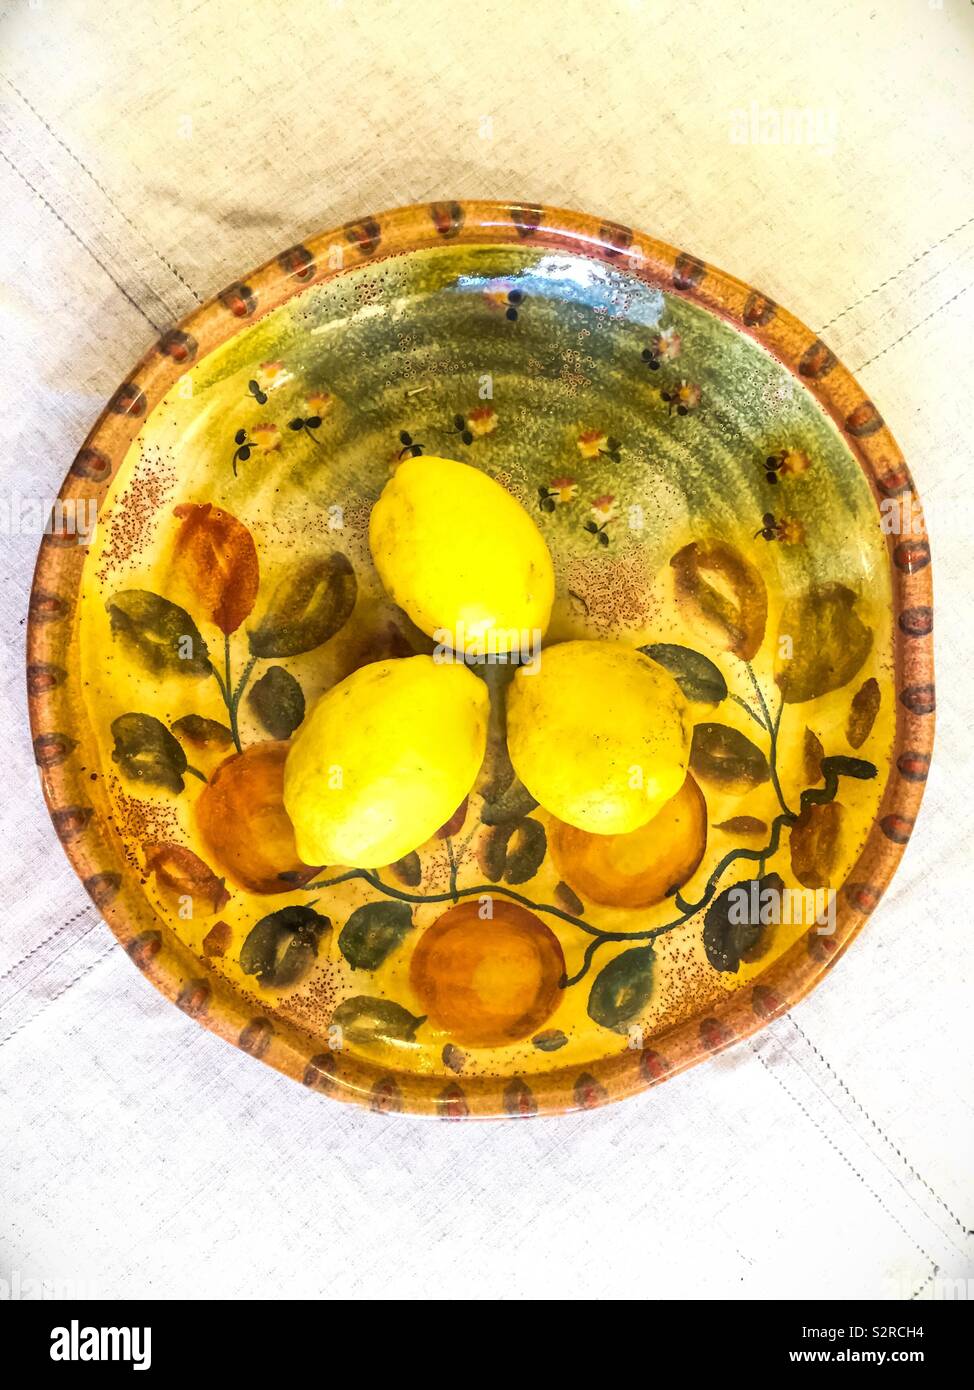 Three lemons on a colorful plate of Sorrento design from Ravello, the Amalfi Coast. The lemons are used for making the famous liqueur, Limoncello. Concepts: art, life, nature, Italian, floral, design Stock Photo